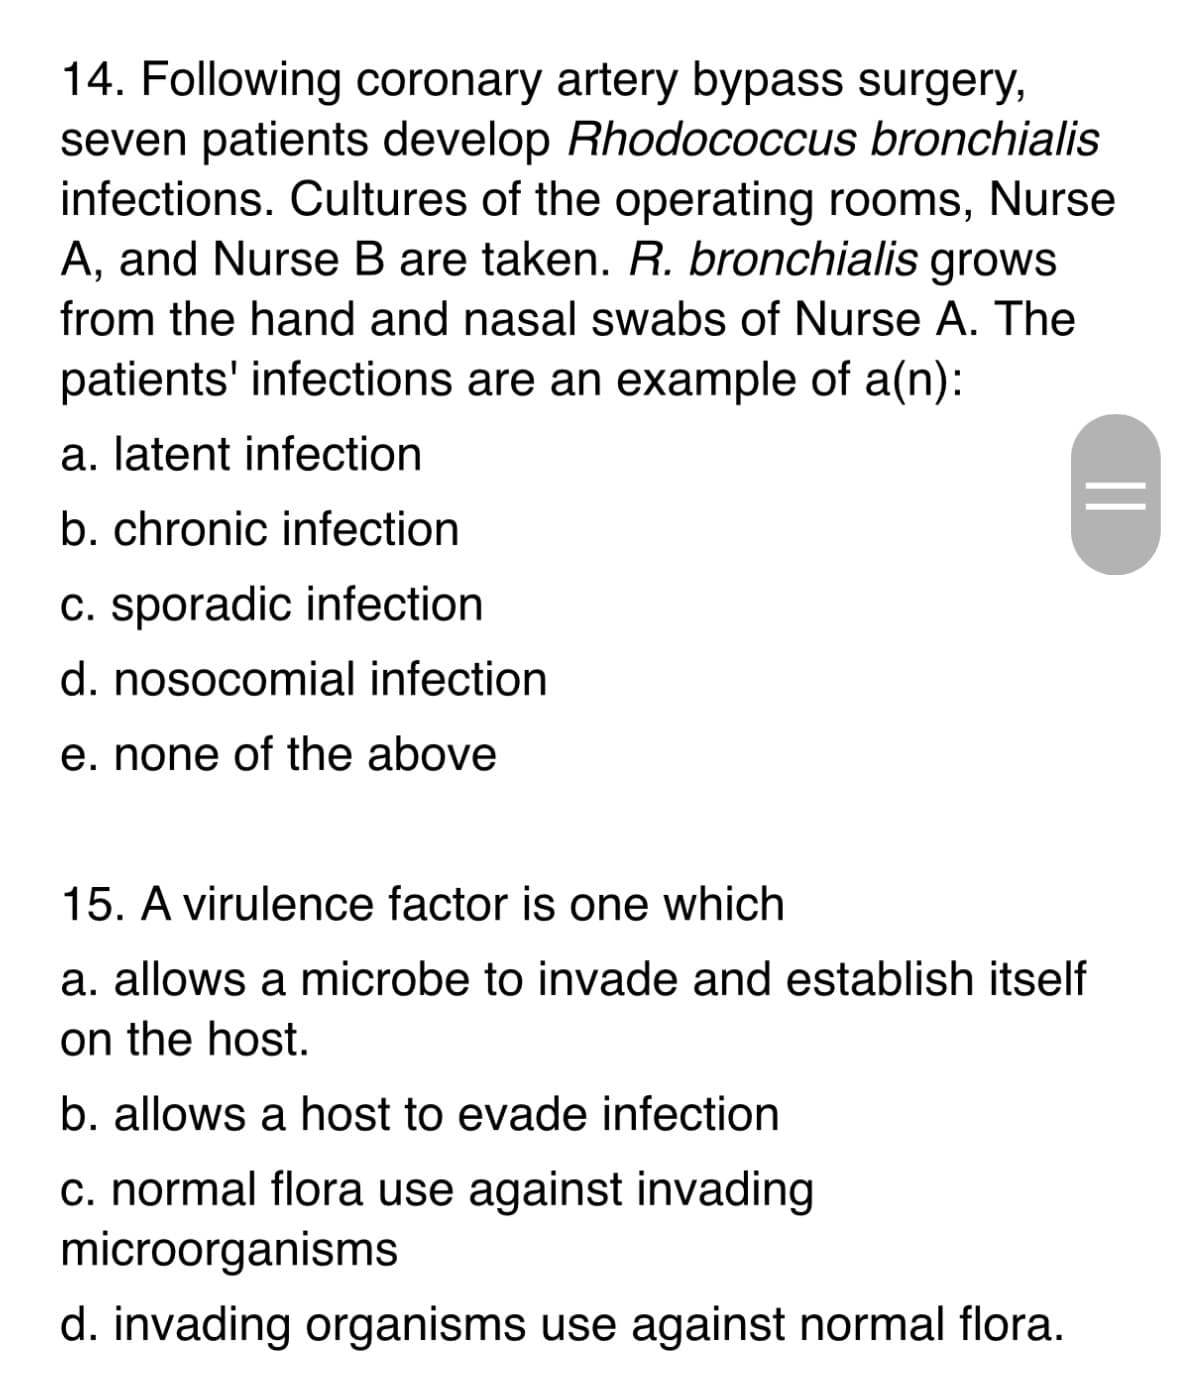 14. Following coronary artery bypass surgery,
seven patients develop Rhodococcus bronchialis
infections. Cultures of the operating rooms, Nurse
A, and Nurse B are taken. R. bronchialis grows
from the hand and nasal swabs of Nurse A. The
patients' infections are an example of a(n):
a. latent infection
b. chronic infection
c. sporadic infection
d. nosocomial infection
e. none of the above
||
15. A virulence factor is one which
a. allows a microbe to invade and establish itself
on the host.
b. allows a host to evade infection
c. normal flora use against invading
microorganisms
d. invading organisms use against normal flora.